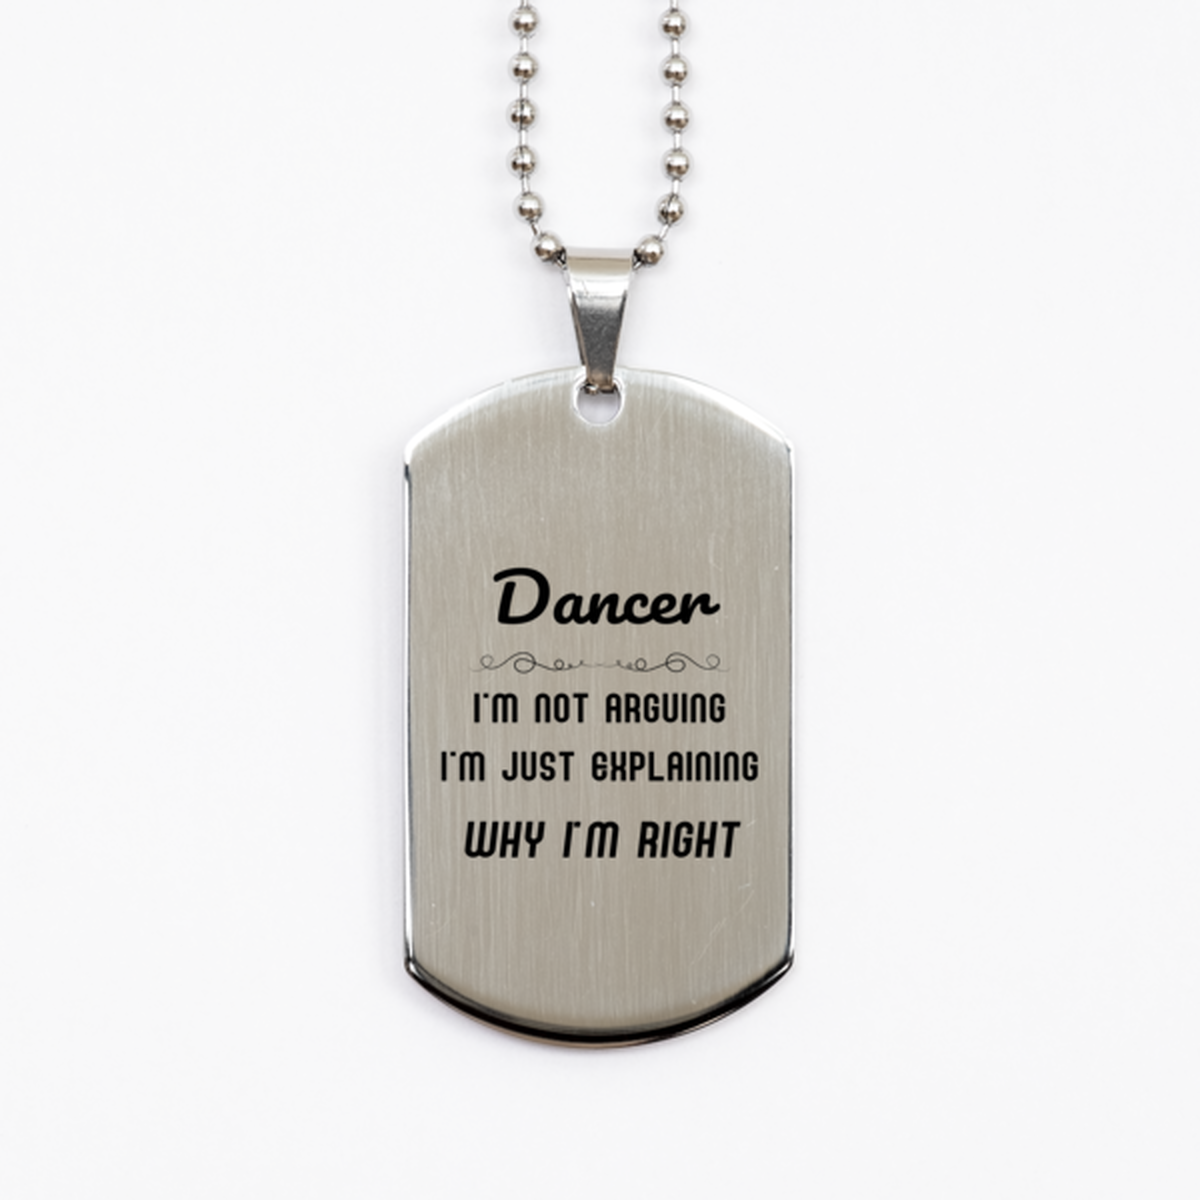 Dancer I'm not Arguing. I'm Just Explaining Why I'm RIGHT Silver Dog Tag, Funny Saying Quote Dancer Gifts For Dancer Graduation Birthday Christmas Gifts for Men Women Coworker